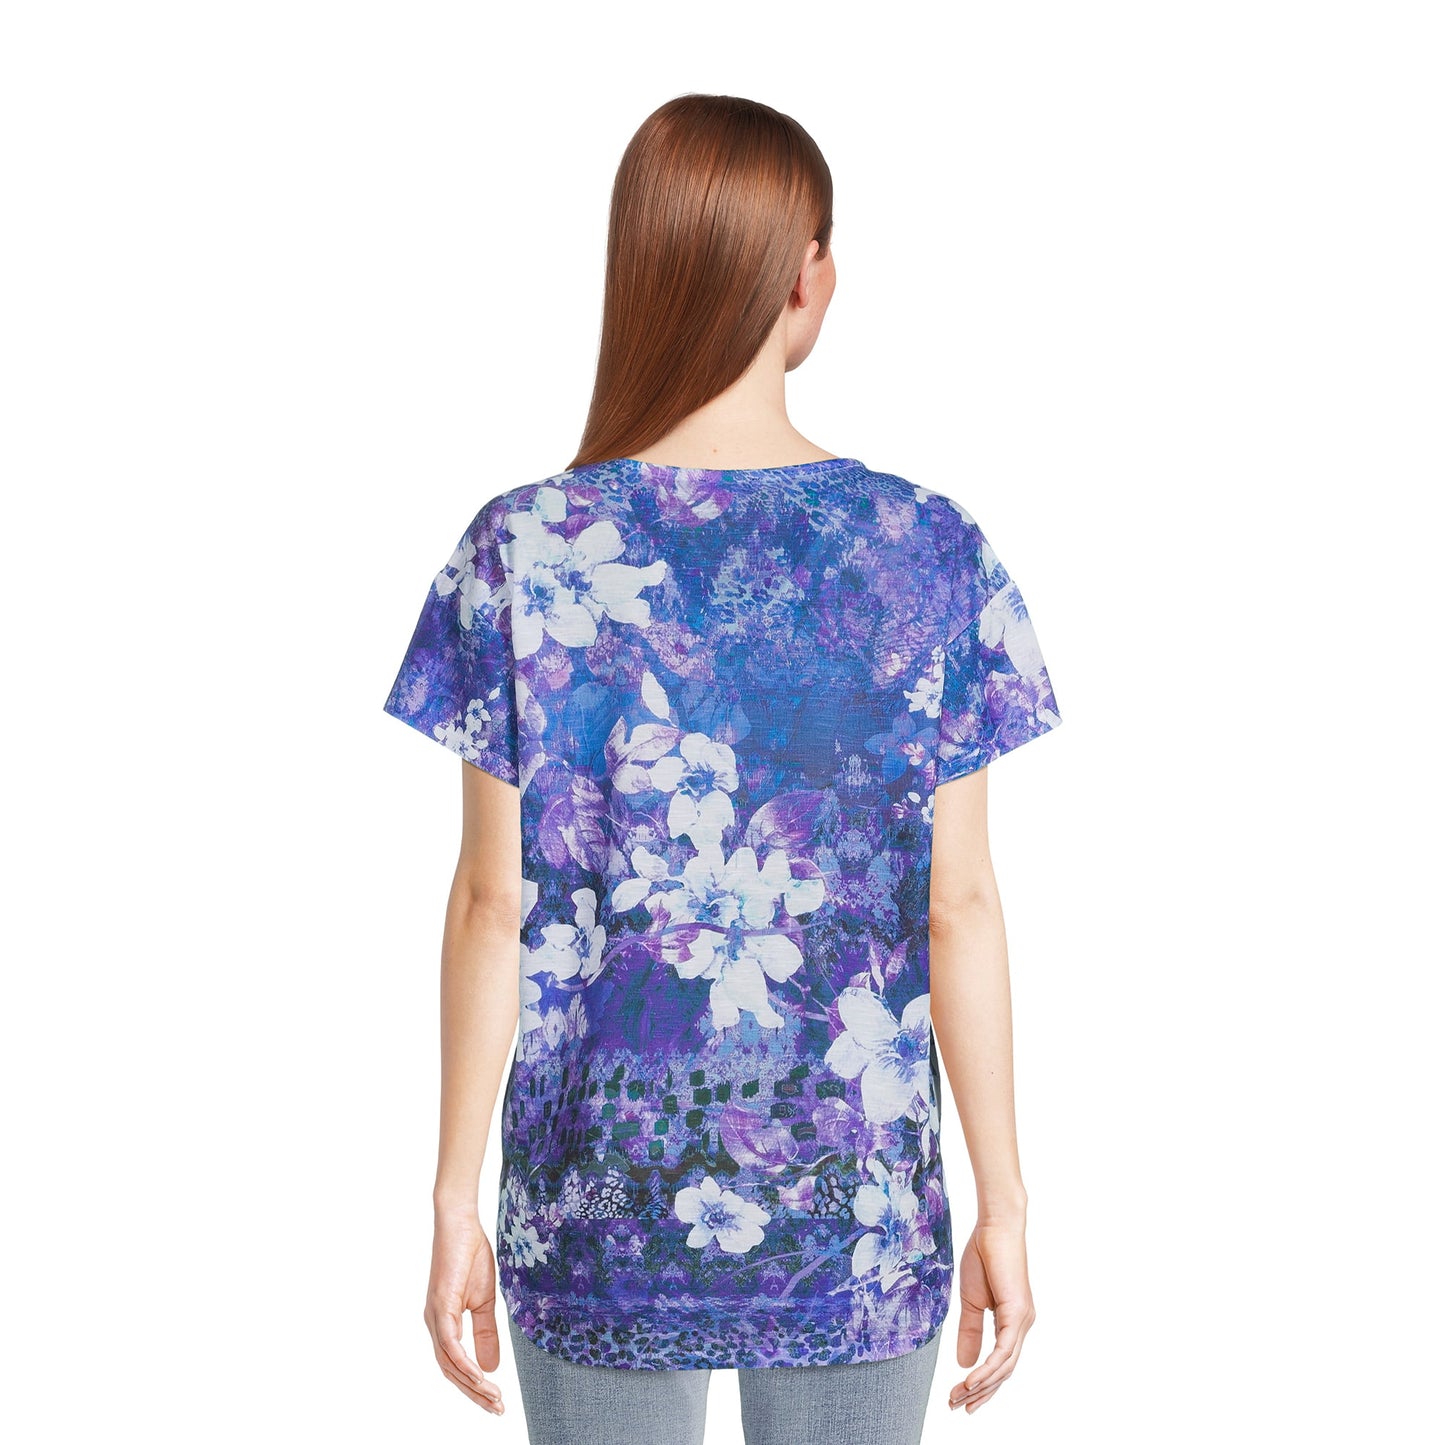 Concepts Women's Sublimation Print Top with Short Sleeves